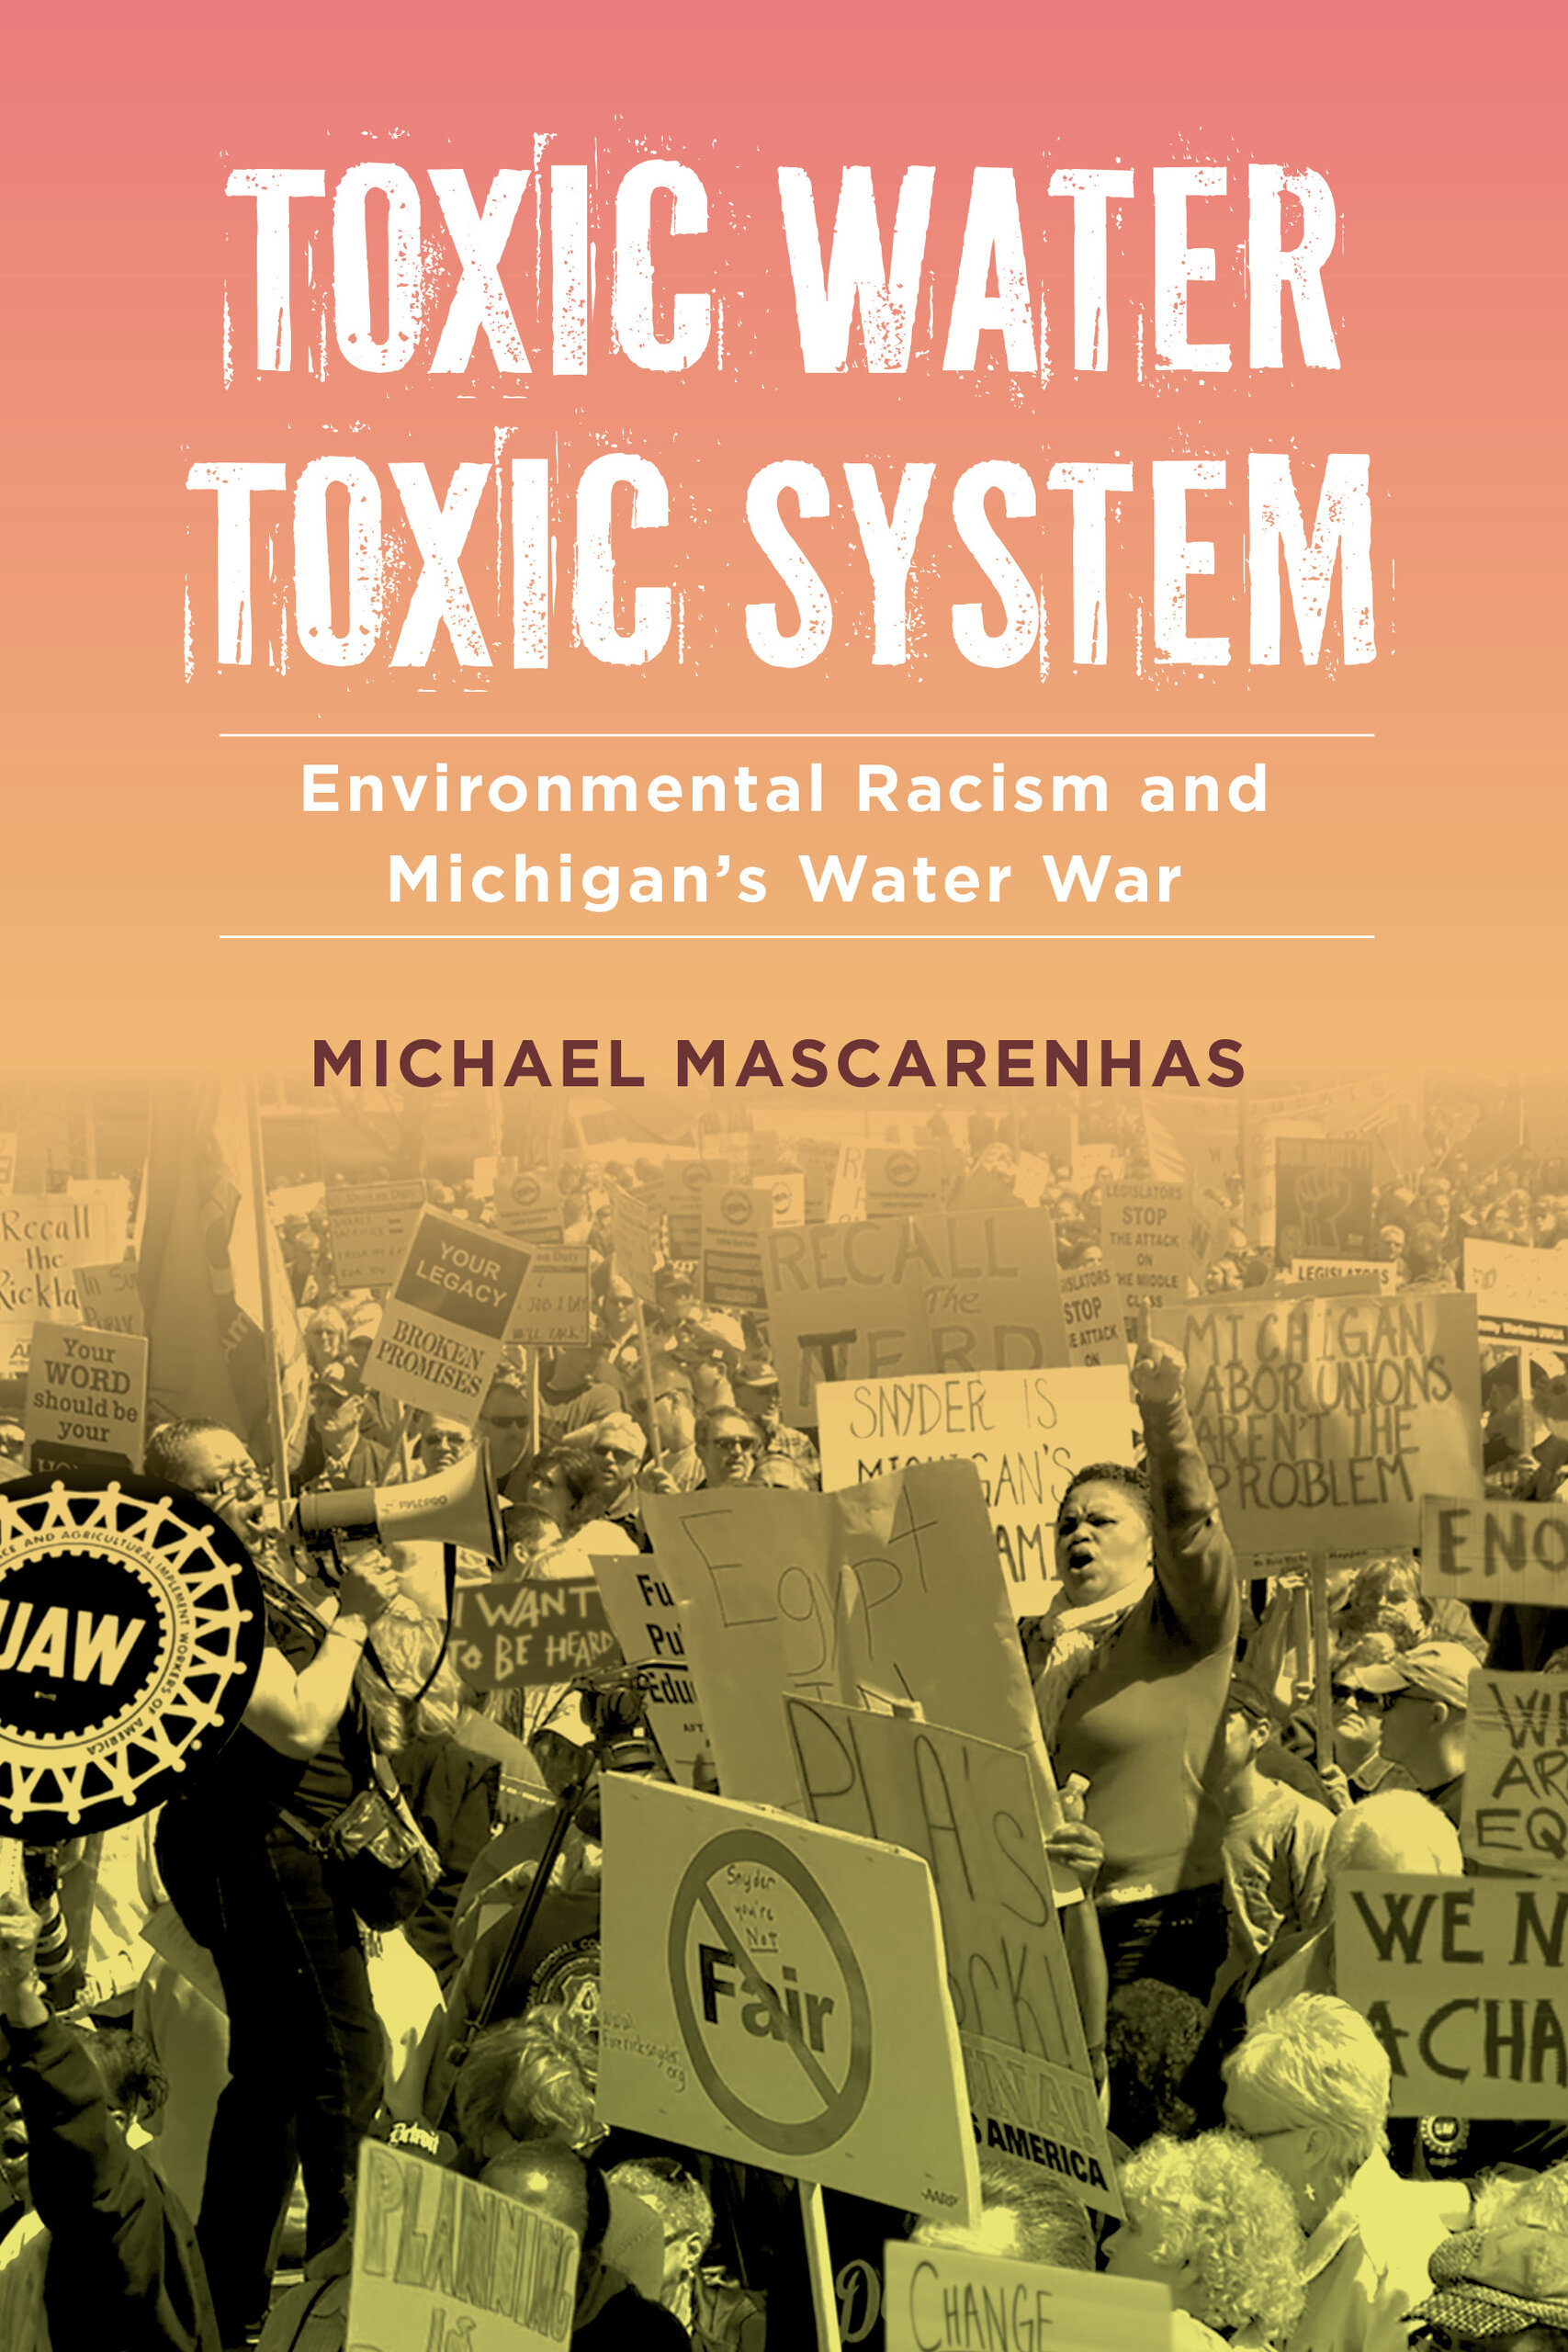 A cover of the book Toxic Water, Toxic System by Michael Mascarenhas.